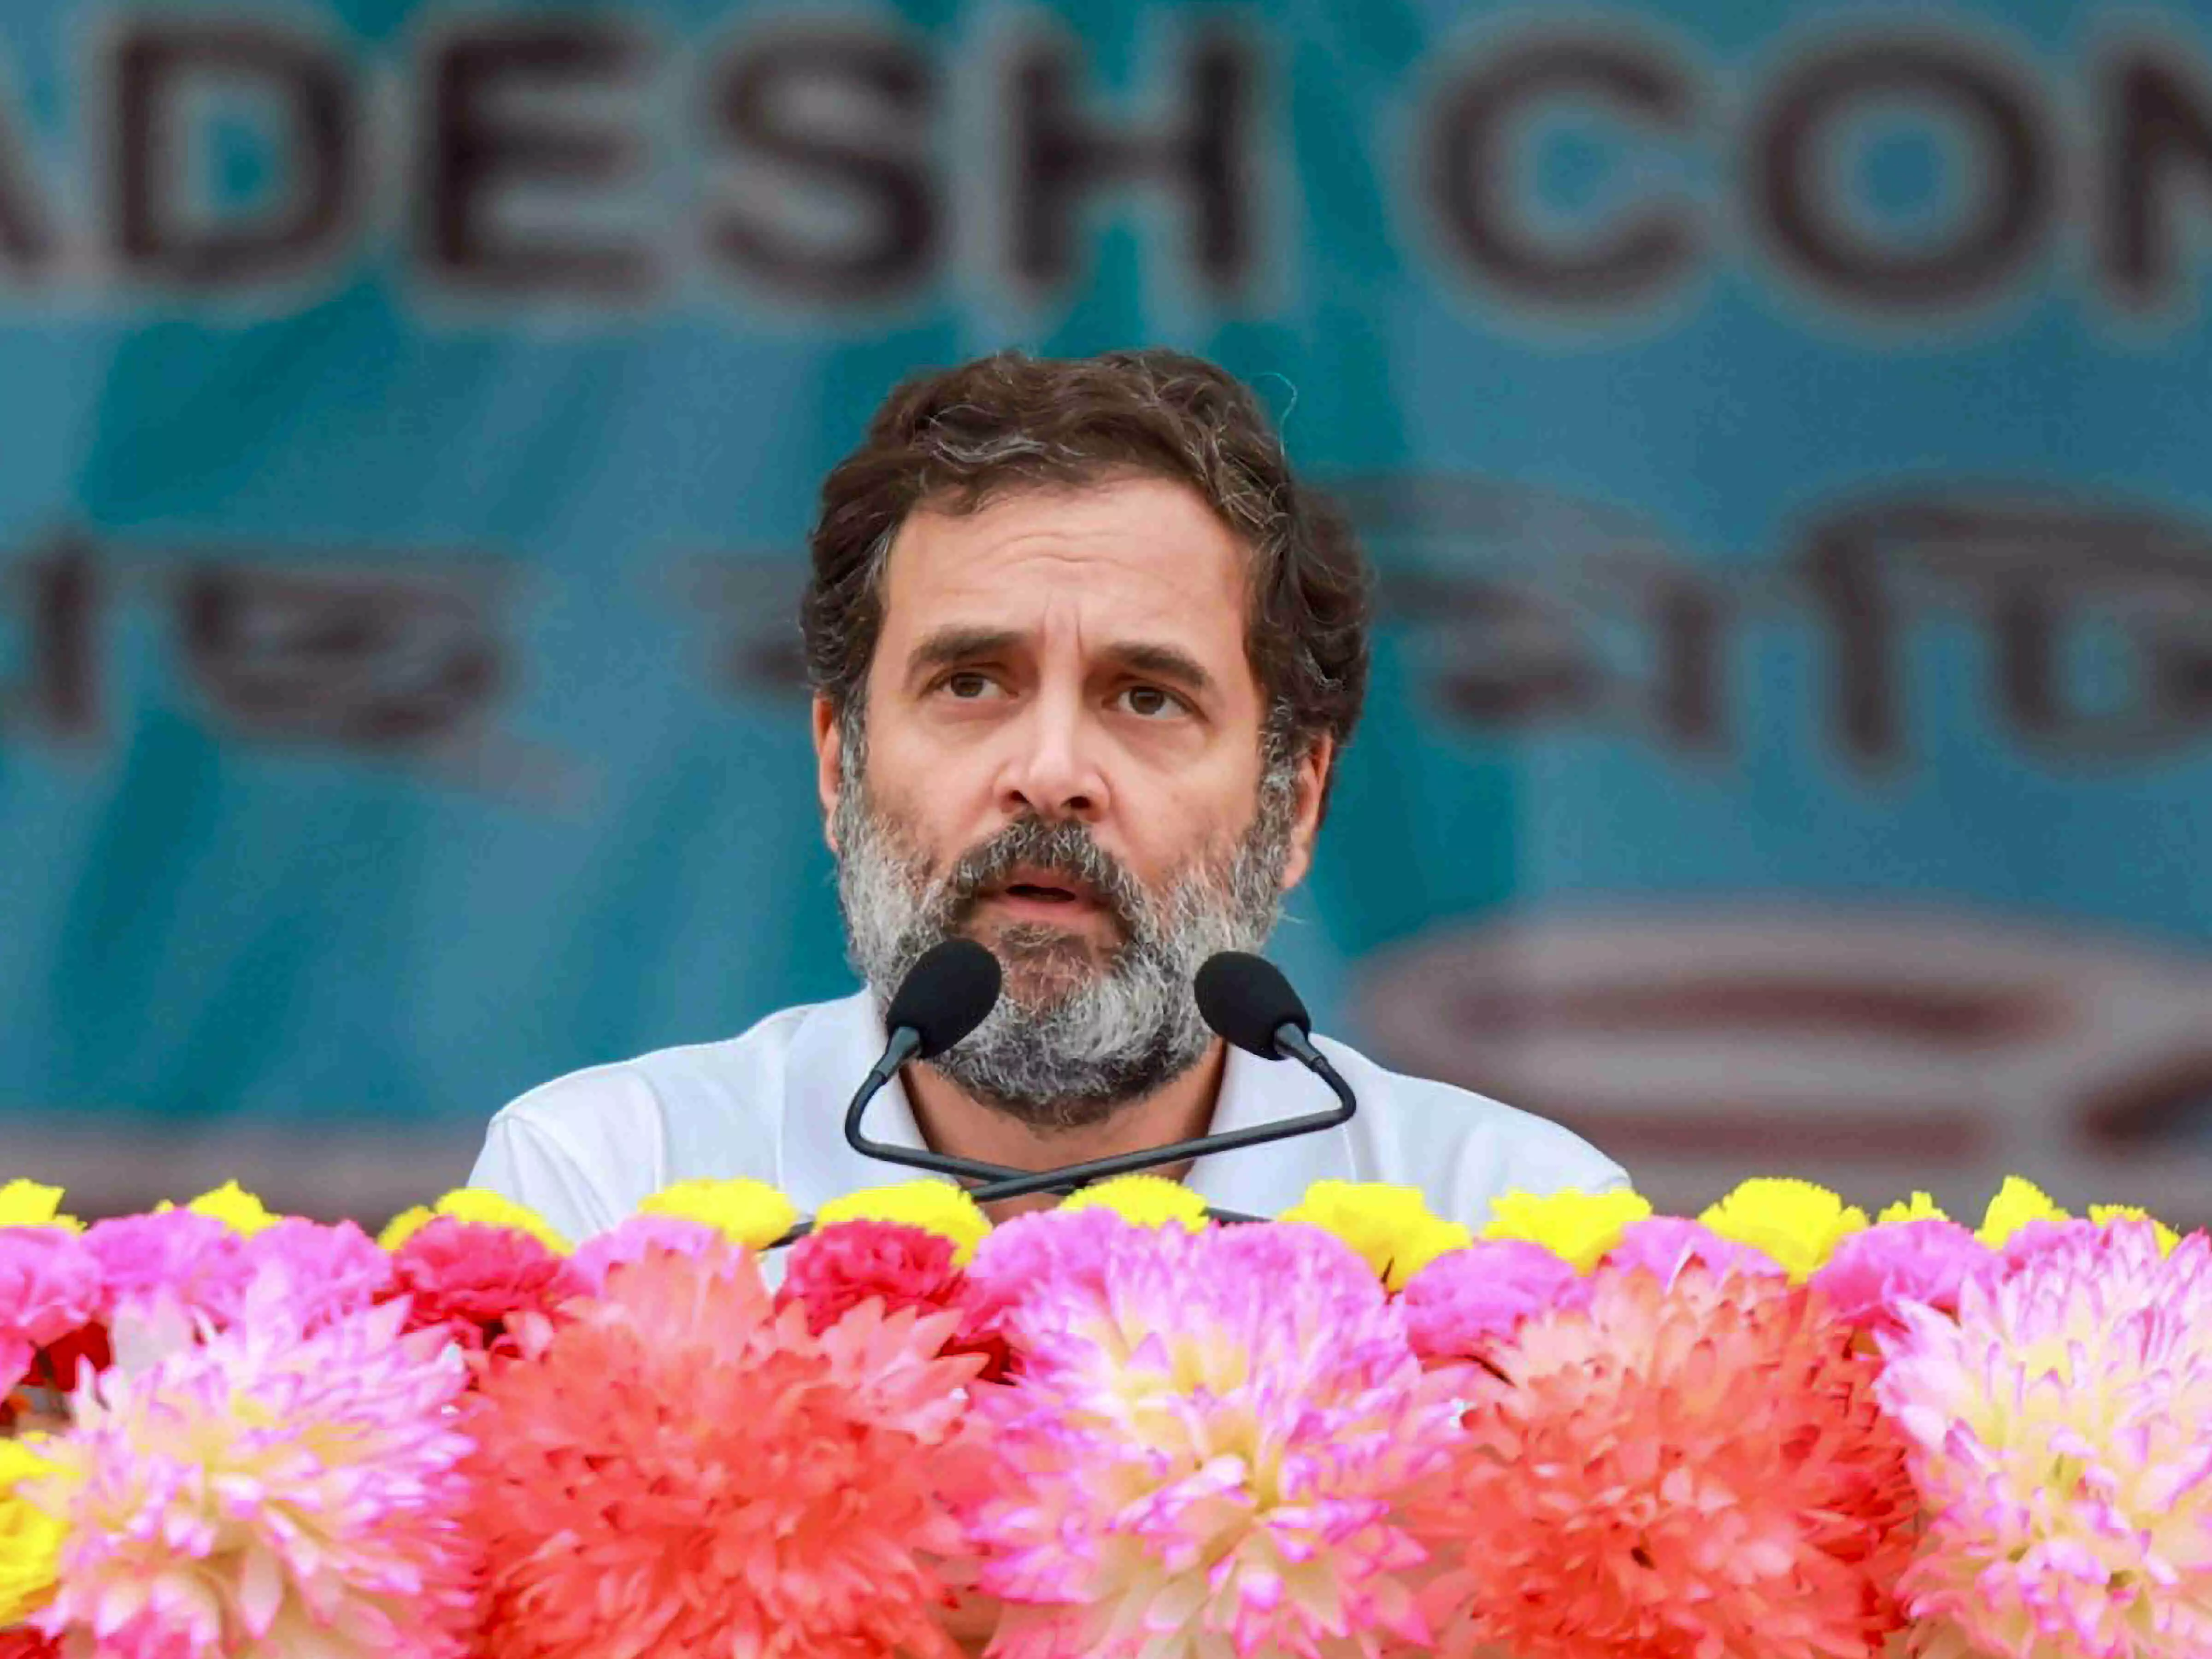 BJP urges EC to take strictest action against Rahul Gandhi for his match-fixing remarks